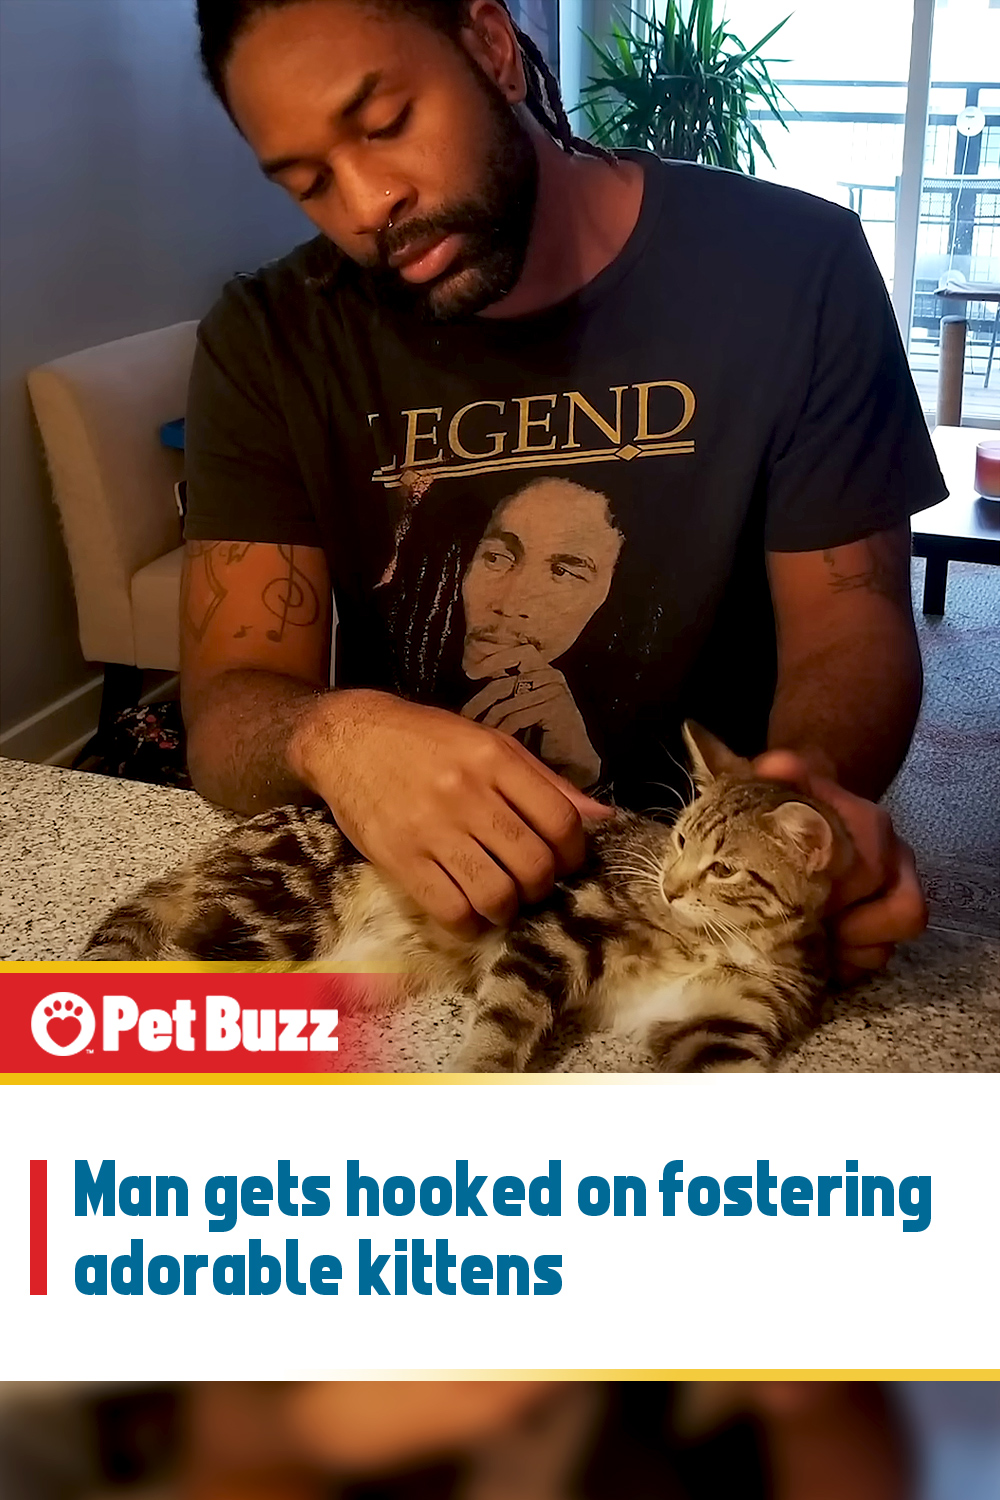 Man gets hooked on fostering adorable kittens